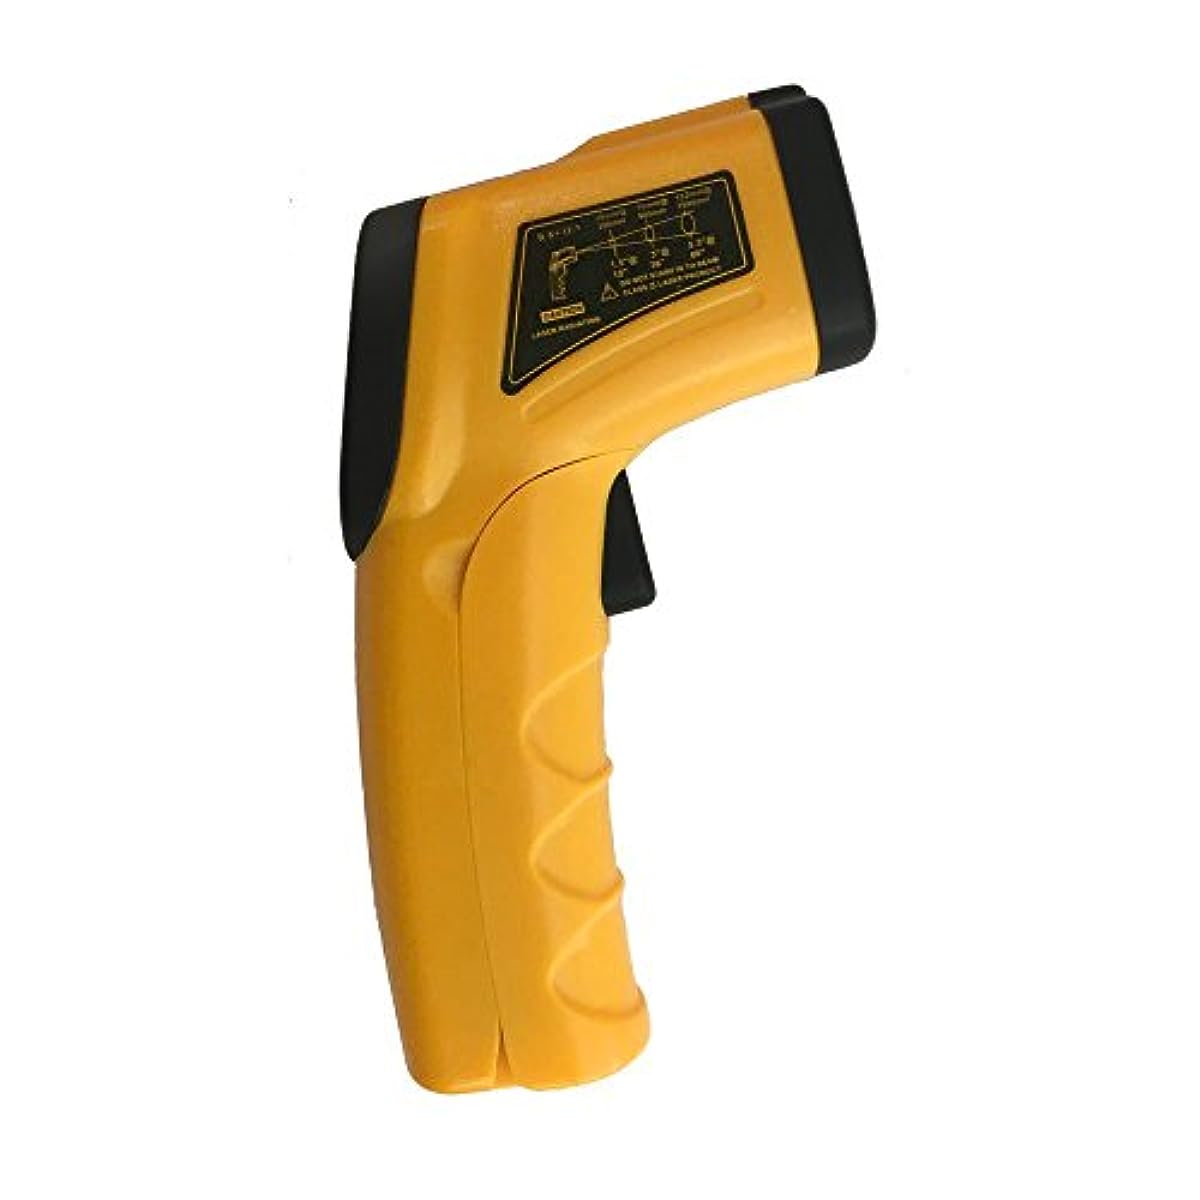 HT-390-Infrared-Thermometer3